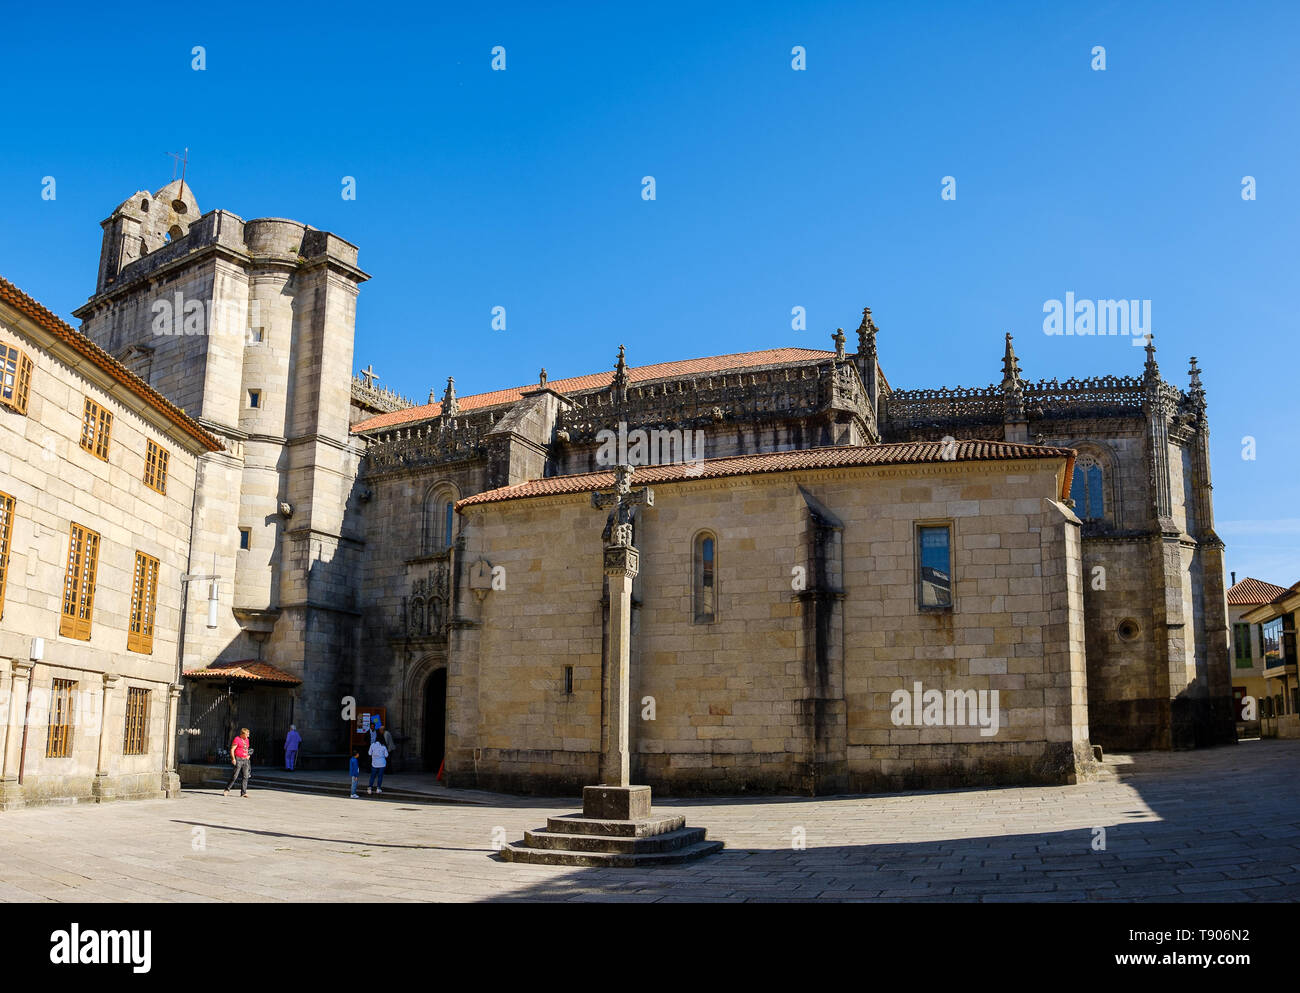 Pontevedra , Spain - May 12, 2019: Tourists and pilgrims roam the streets where magnificent buildings are situated in the historic Spanish city, Ponte Stock Photo